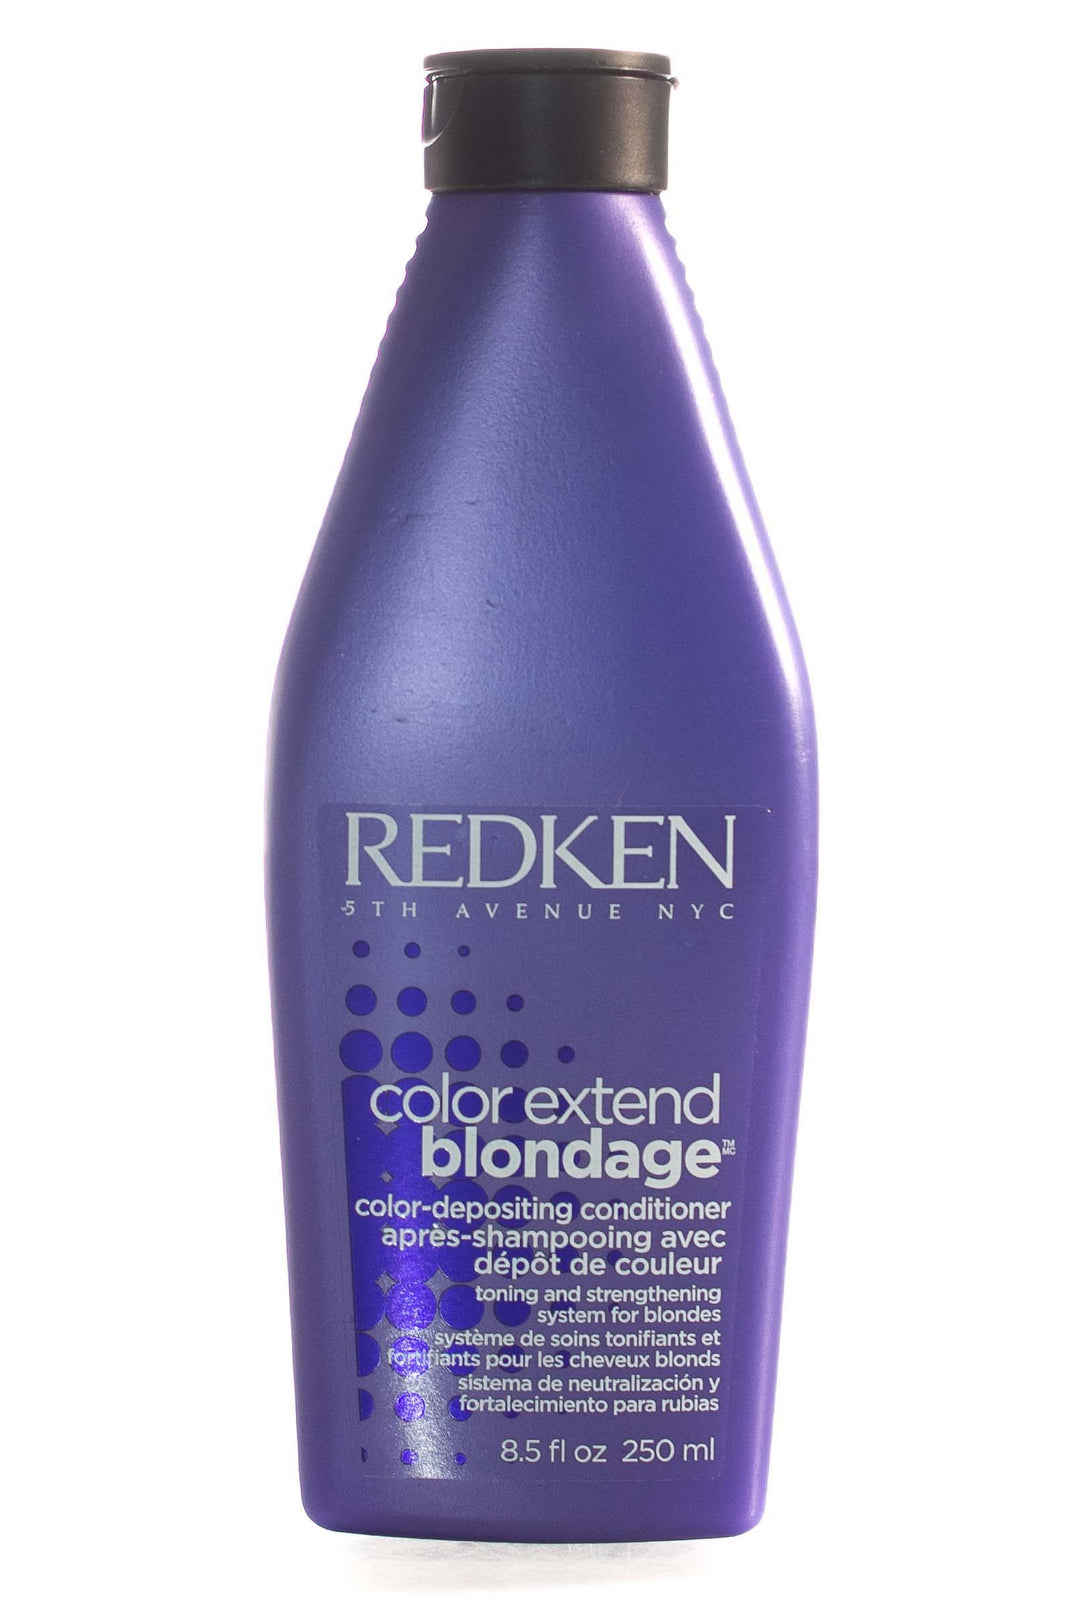 Colour-depositing conditioner for blonde hair.Contains ultra violet pigment and Triple Acid Protein complex to tone, strengthen and brighten all in one for a brighter, stronger blonde. The light purple conditioner helps detangle and smooth processed blonde hair or to condition natural blonde while keeping your color protected and bright. 